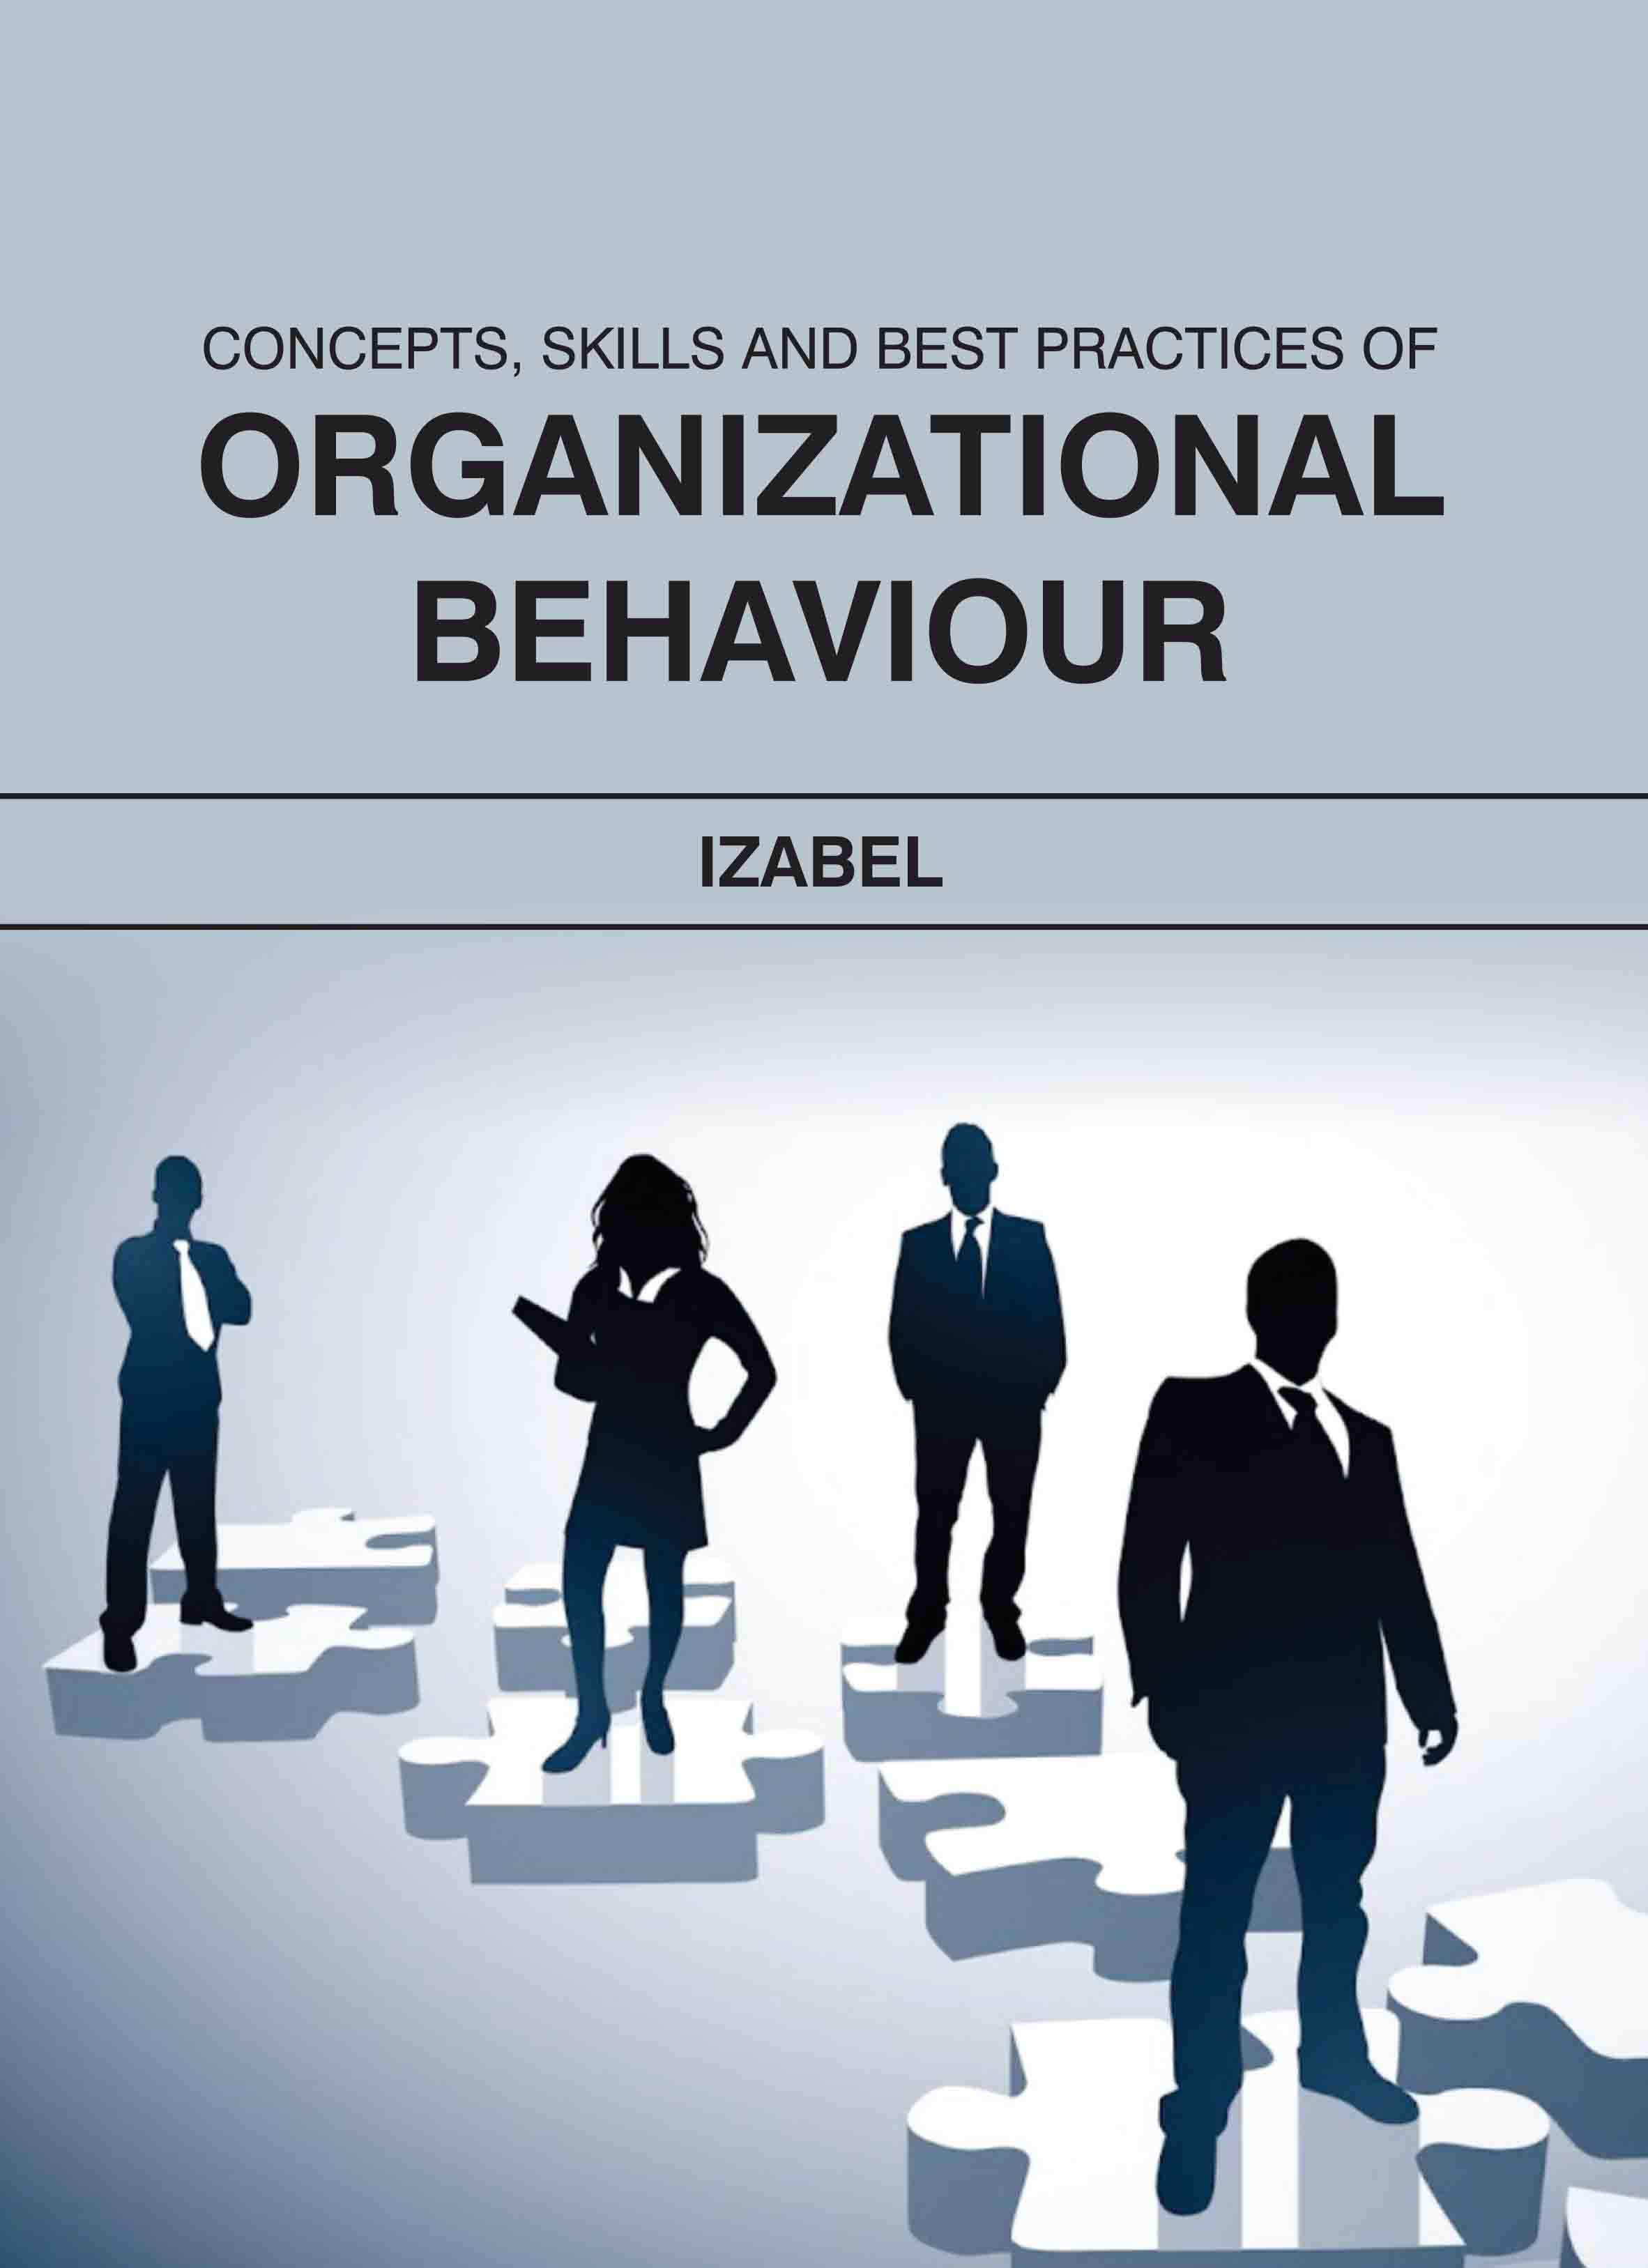 Concepts, Skills and Best Practices of Organizational Behaviour